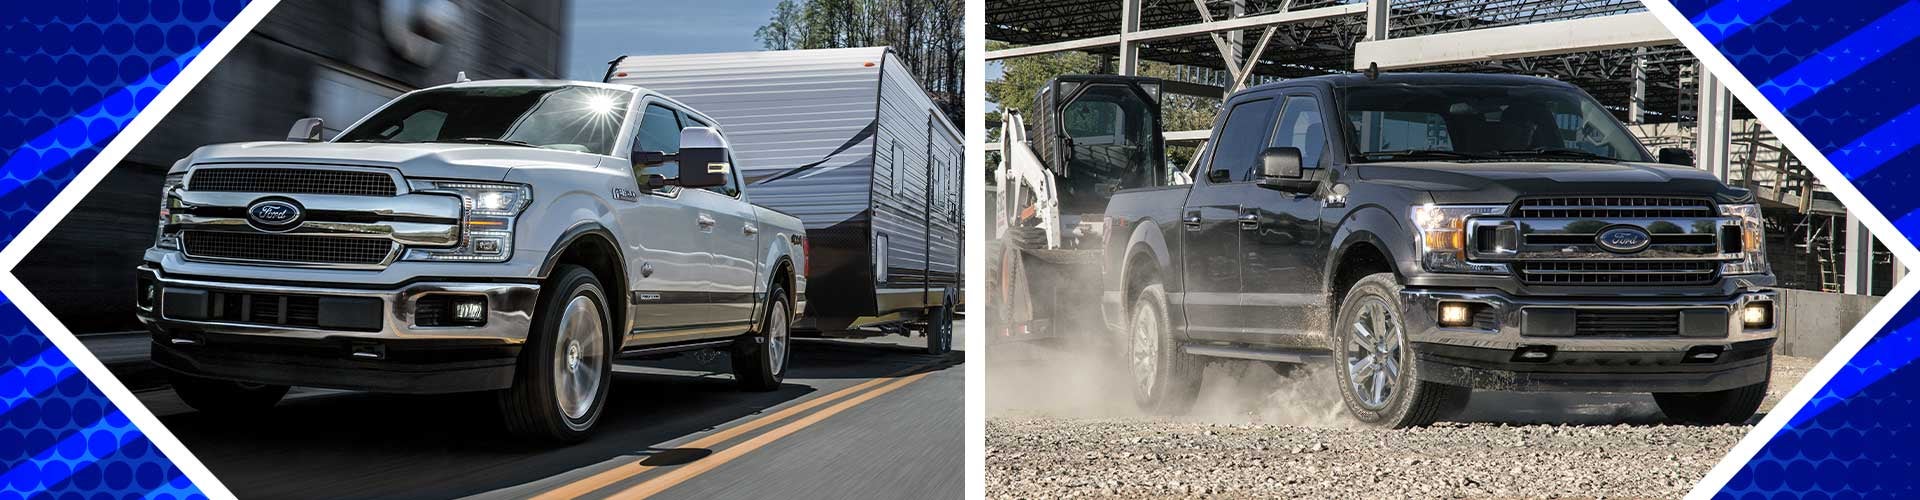 2020 Ford F-150 | Towing Capacity & More | Boulevard Ford of Lewes 2020 Ford F 150 Diesel Towing Capacity